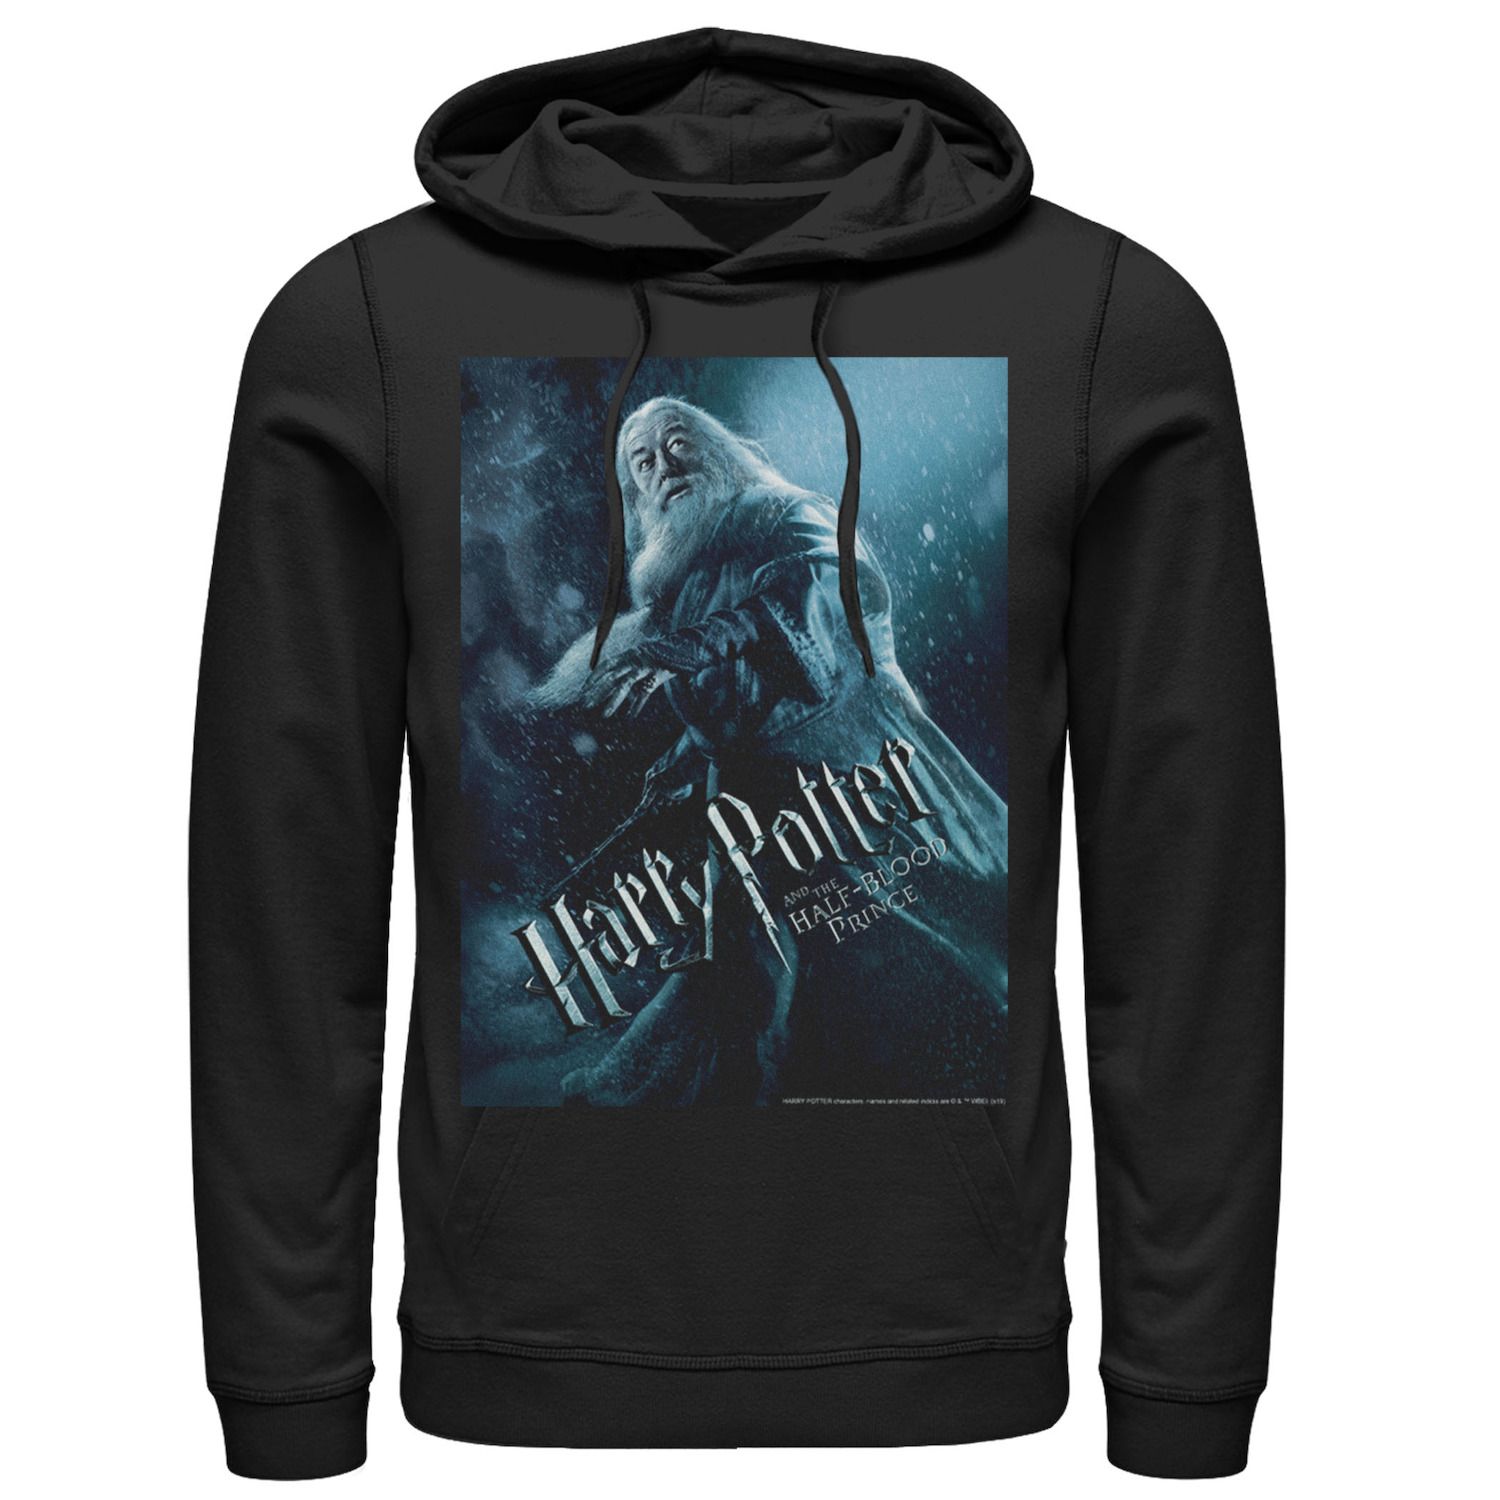 Image for Harry Potter Men's Half-Blood Prince Dumbledore Poster Graphic Pullover Hoodie at Kohl's.